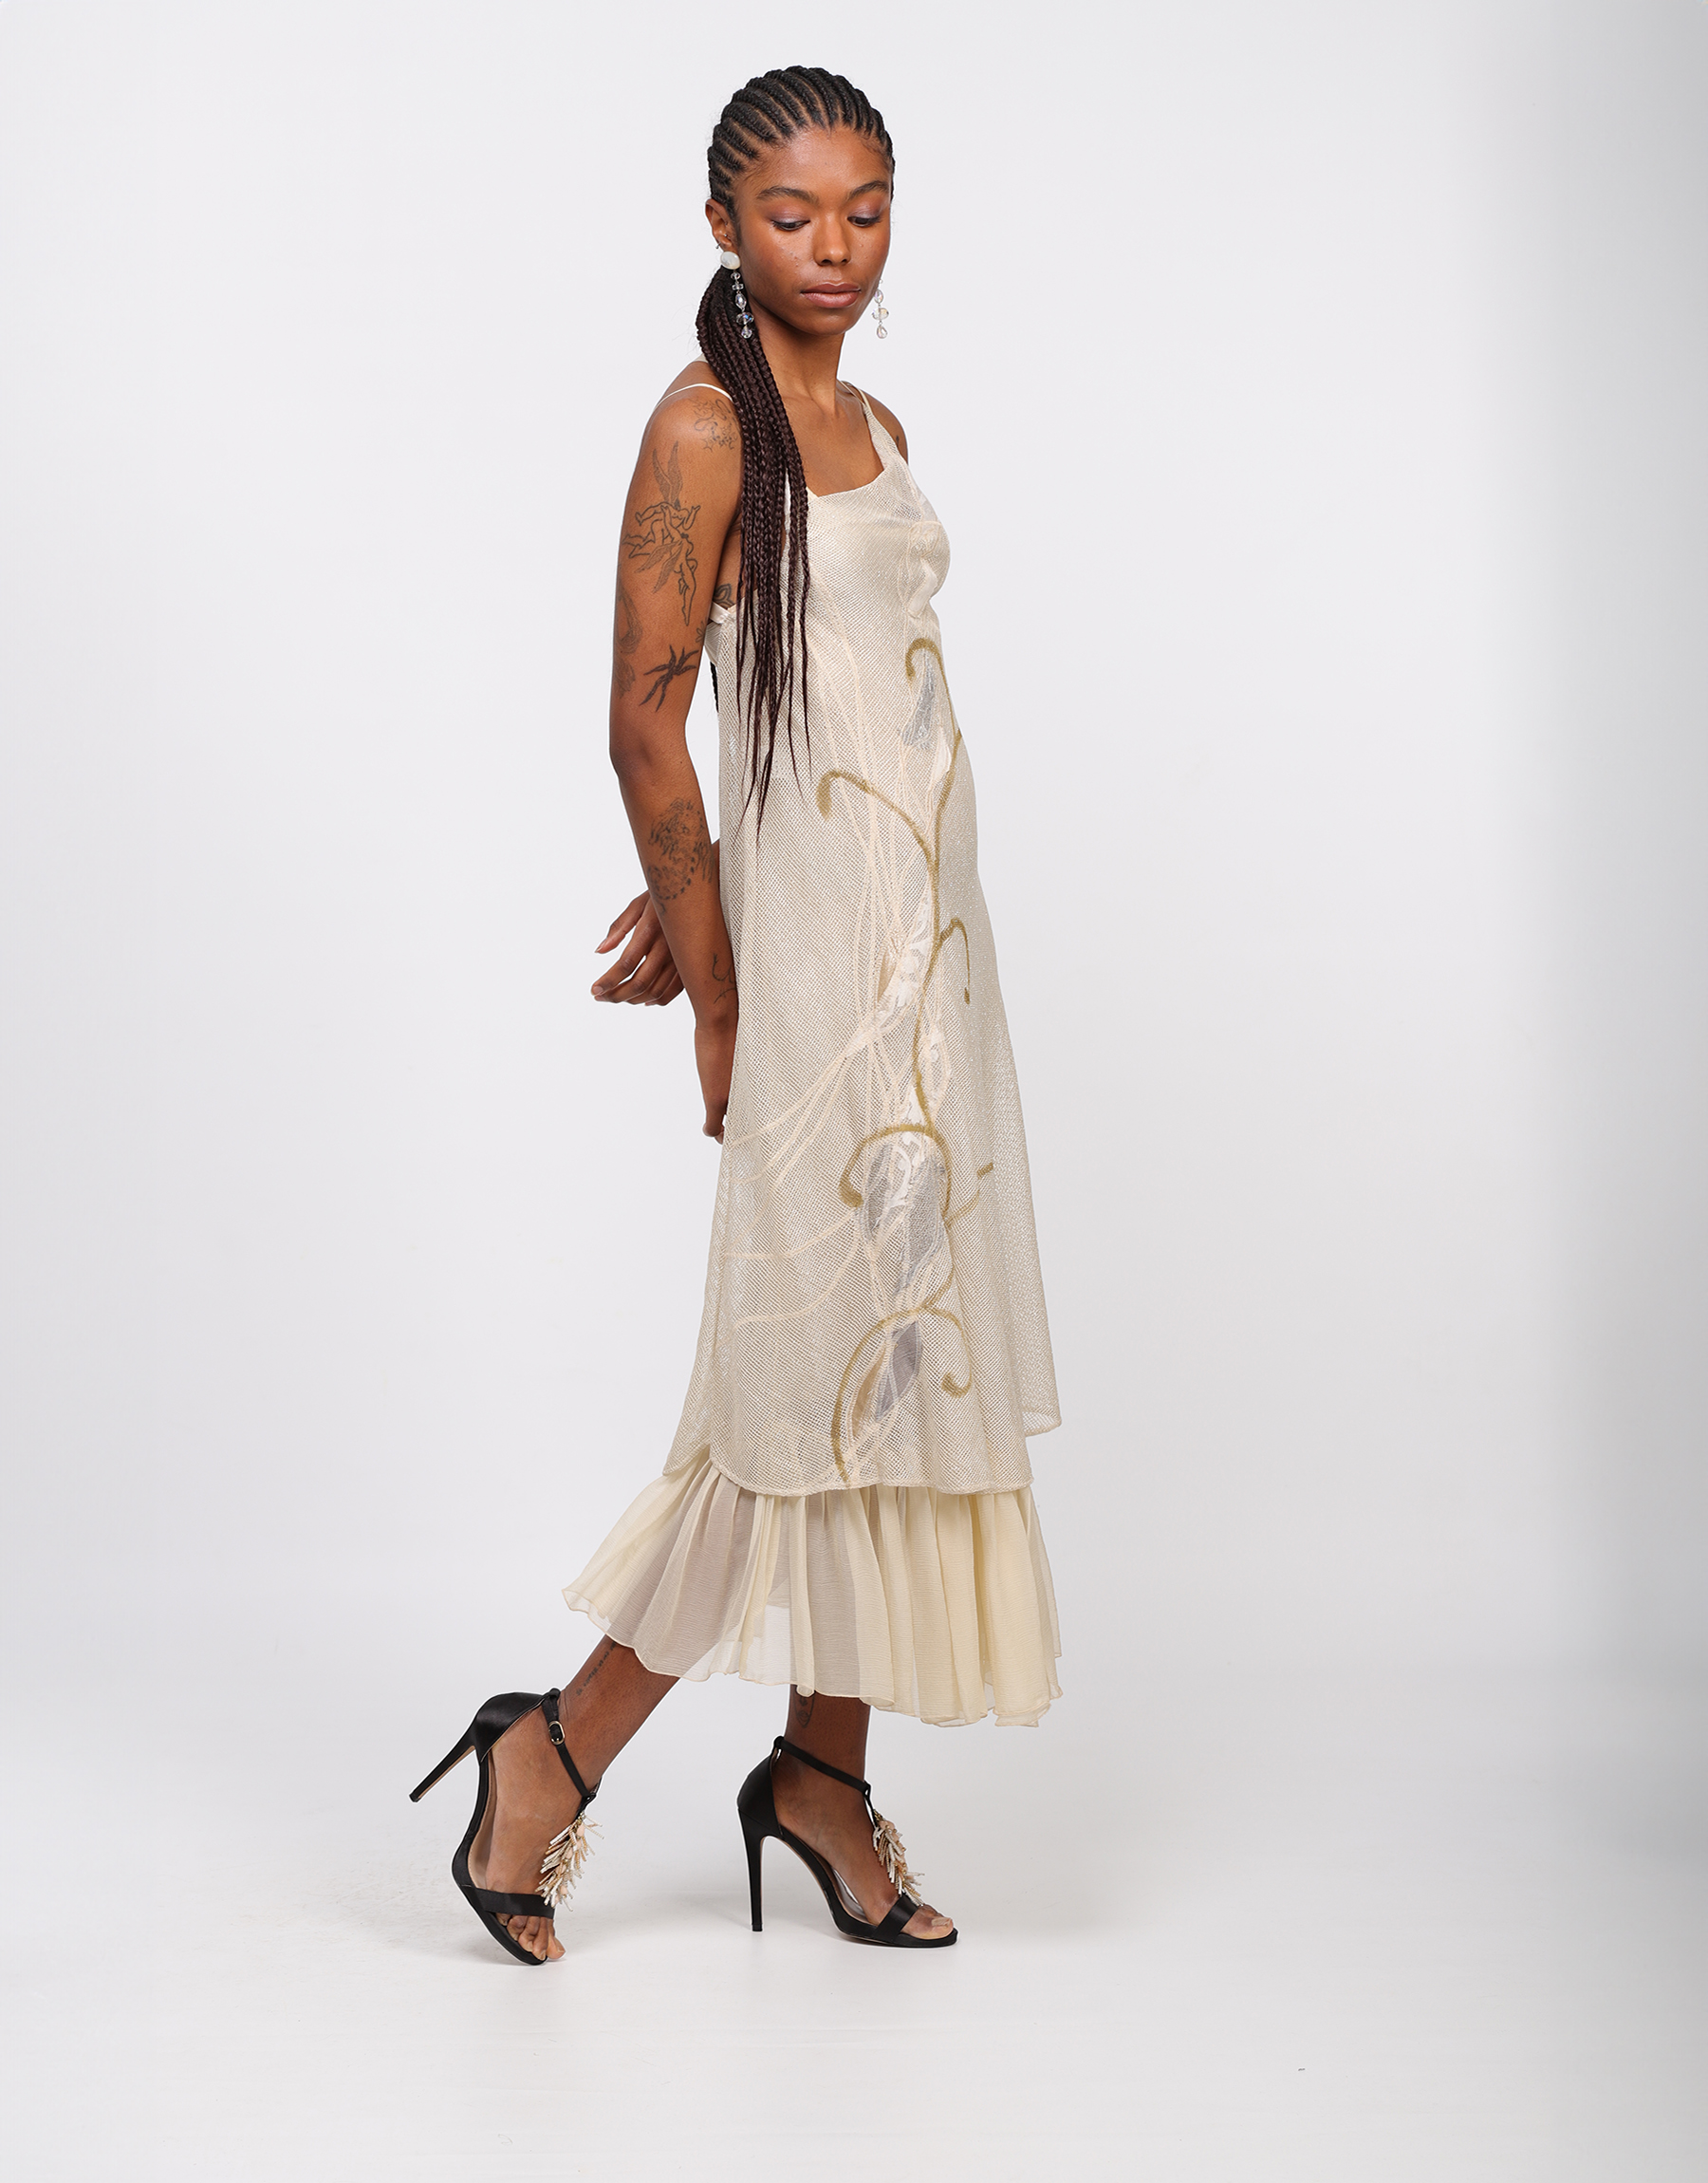 Long strappy dress in iridescent mesh and ivory chiffon